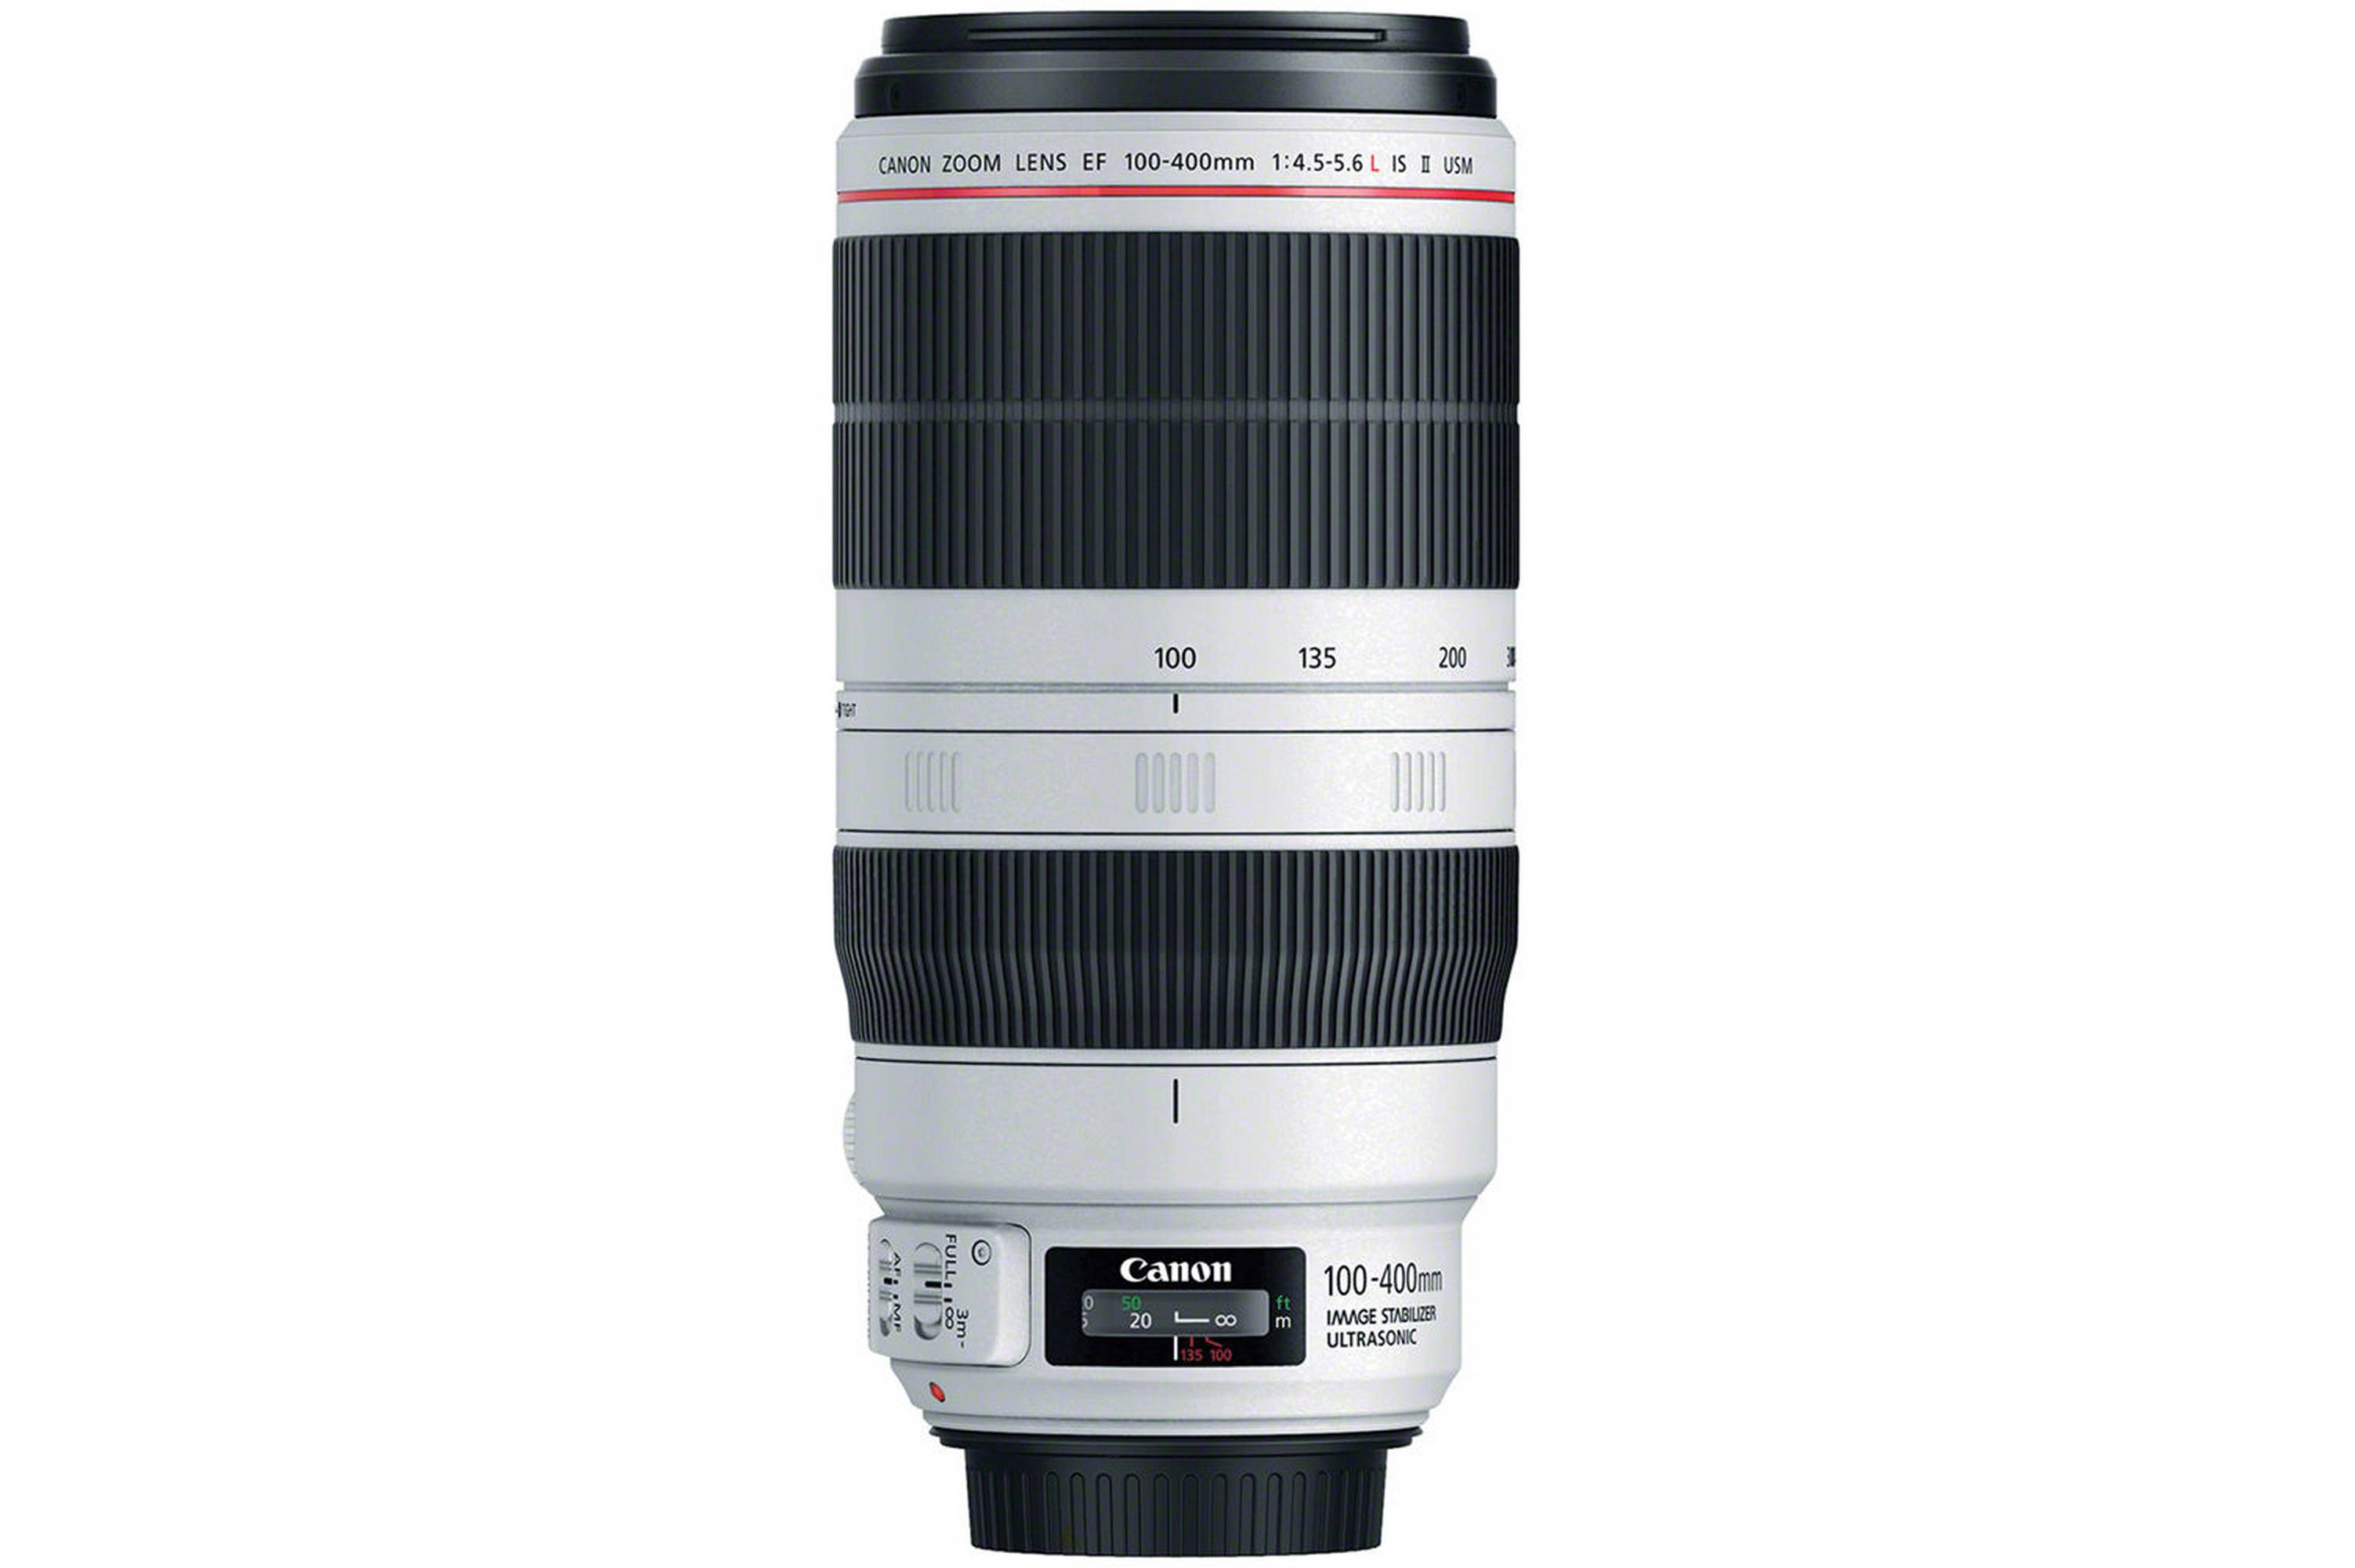 Canon zoomlens EF 100-400 mm 1:4.5-5.6L IS II USM Canon zoomlens EF 100-400 mm 1:4.5-5.6L IS II USM